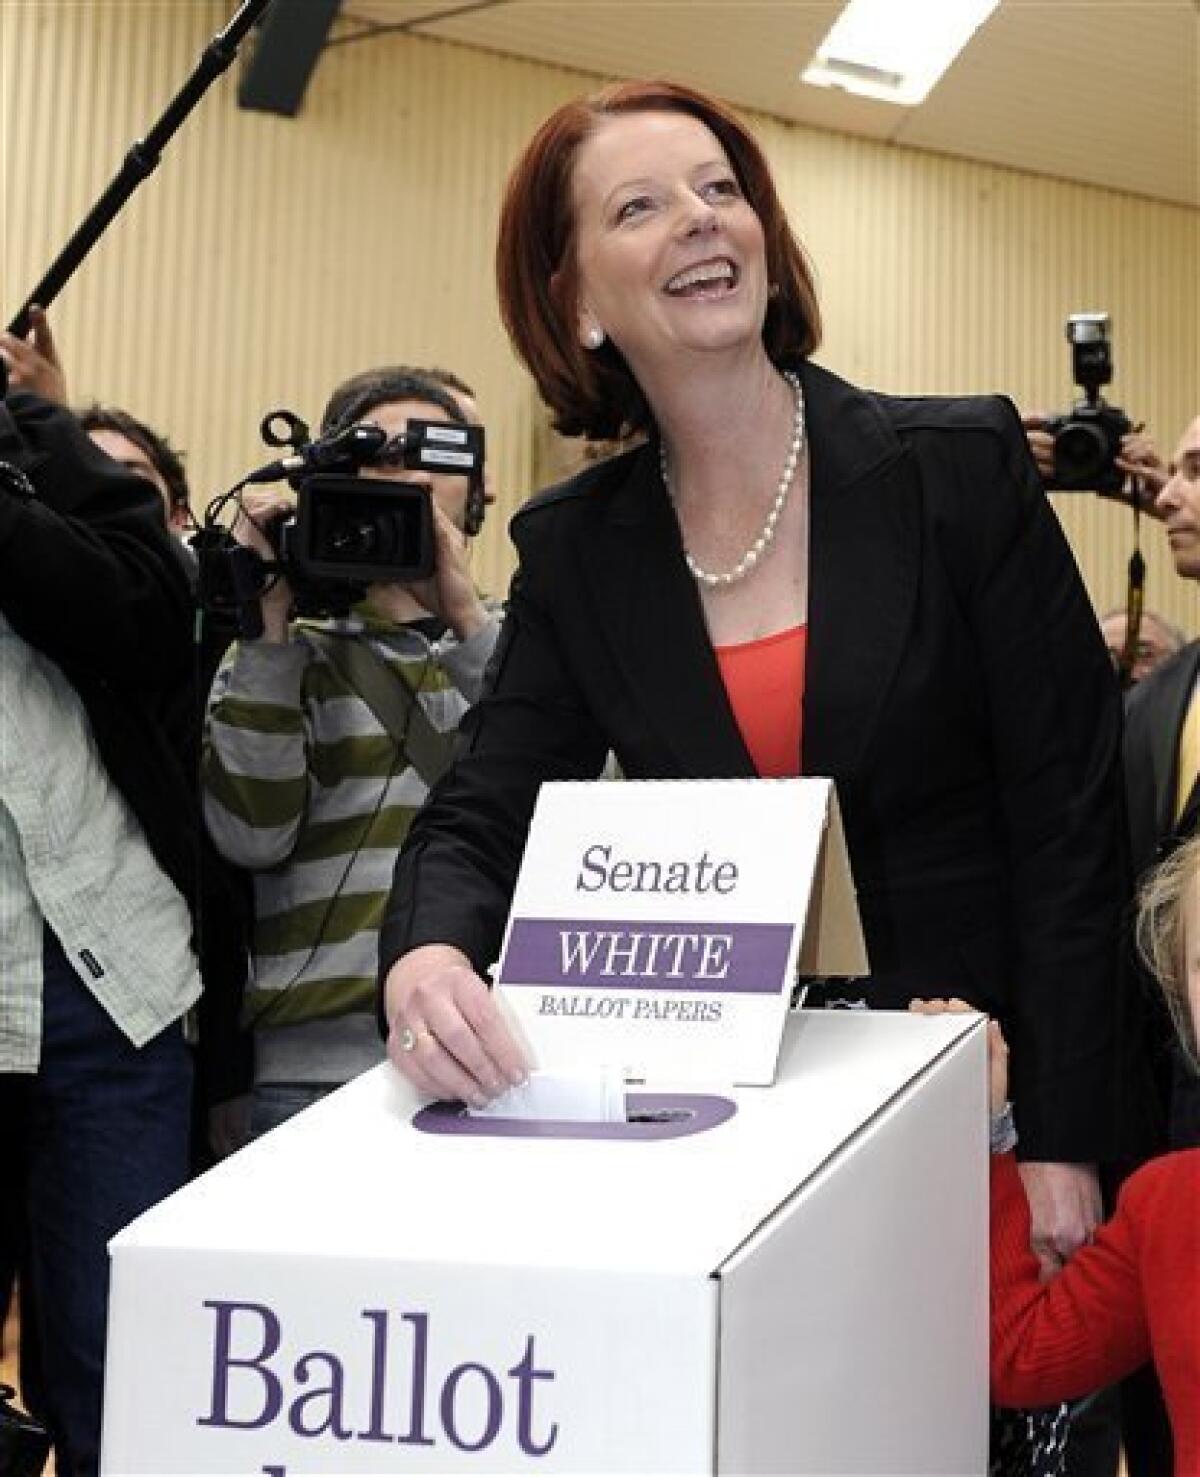 Australian Prime Minister Julia Gillard, leader of the Australian Labor Party, votes at Seabrook Primary School in Melbourne, Saturday, Aug. 21, 2010. (AP Photo/Andrew Brownbill)